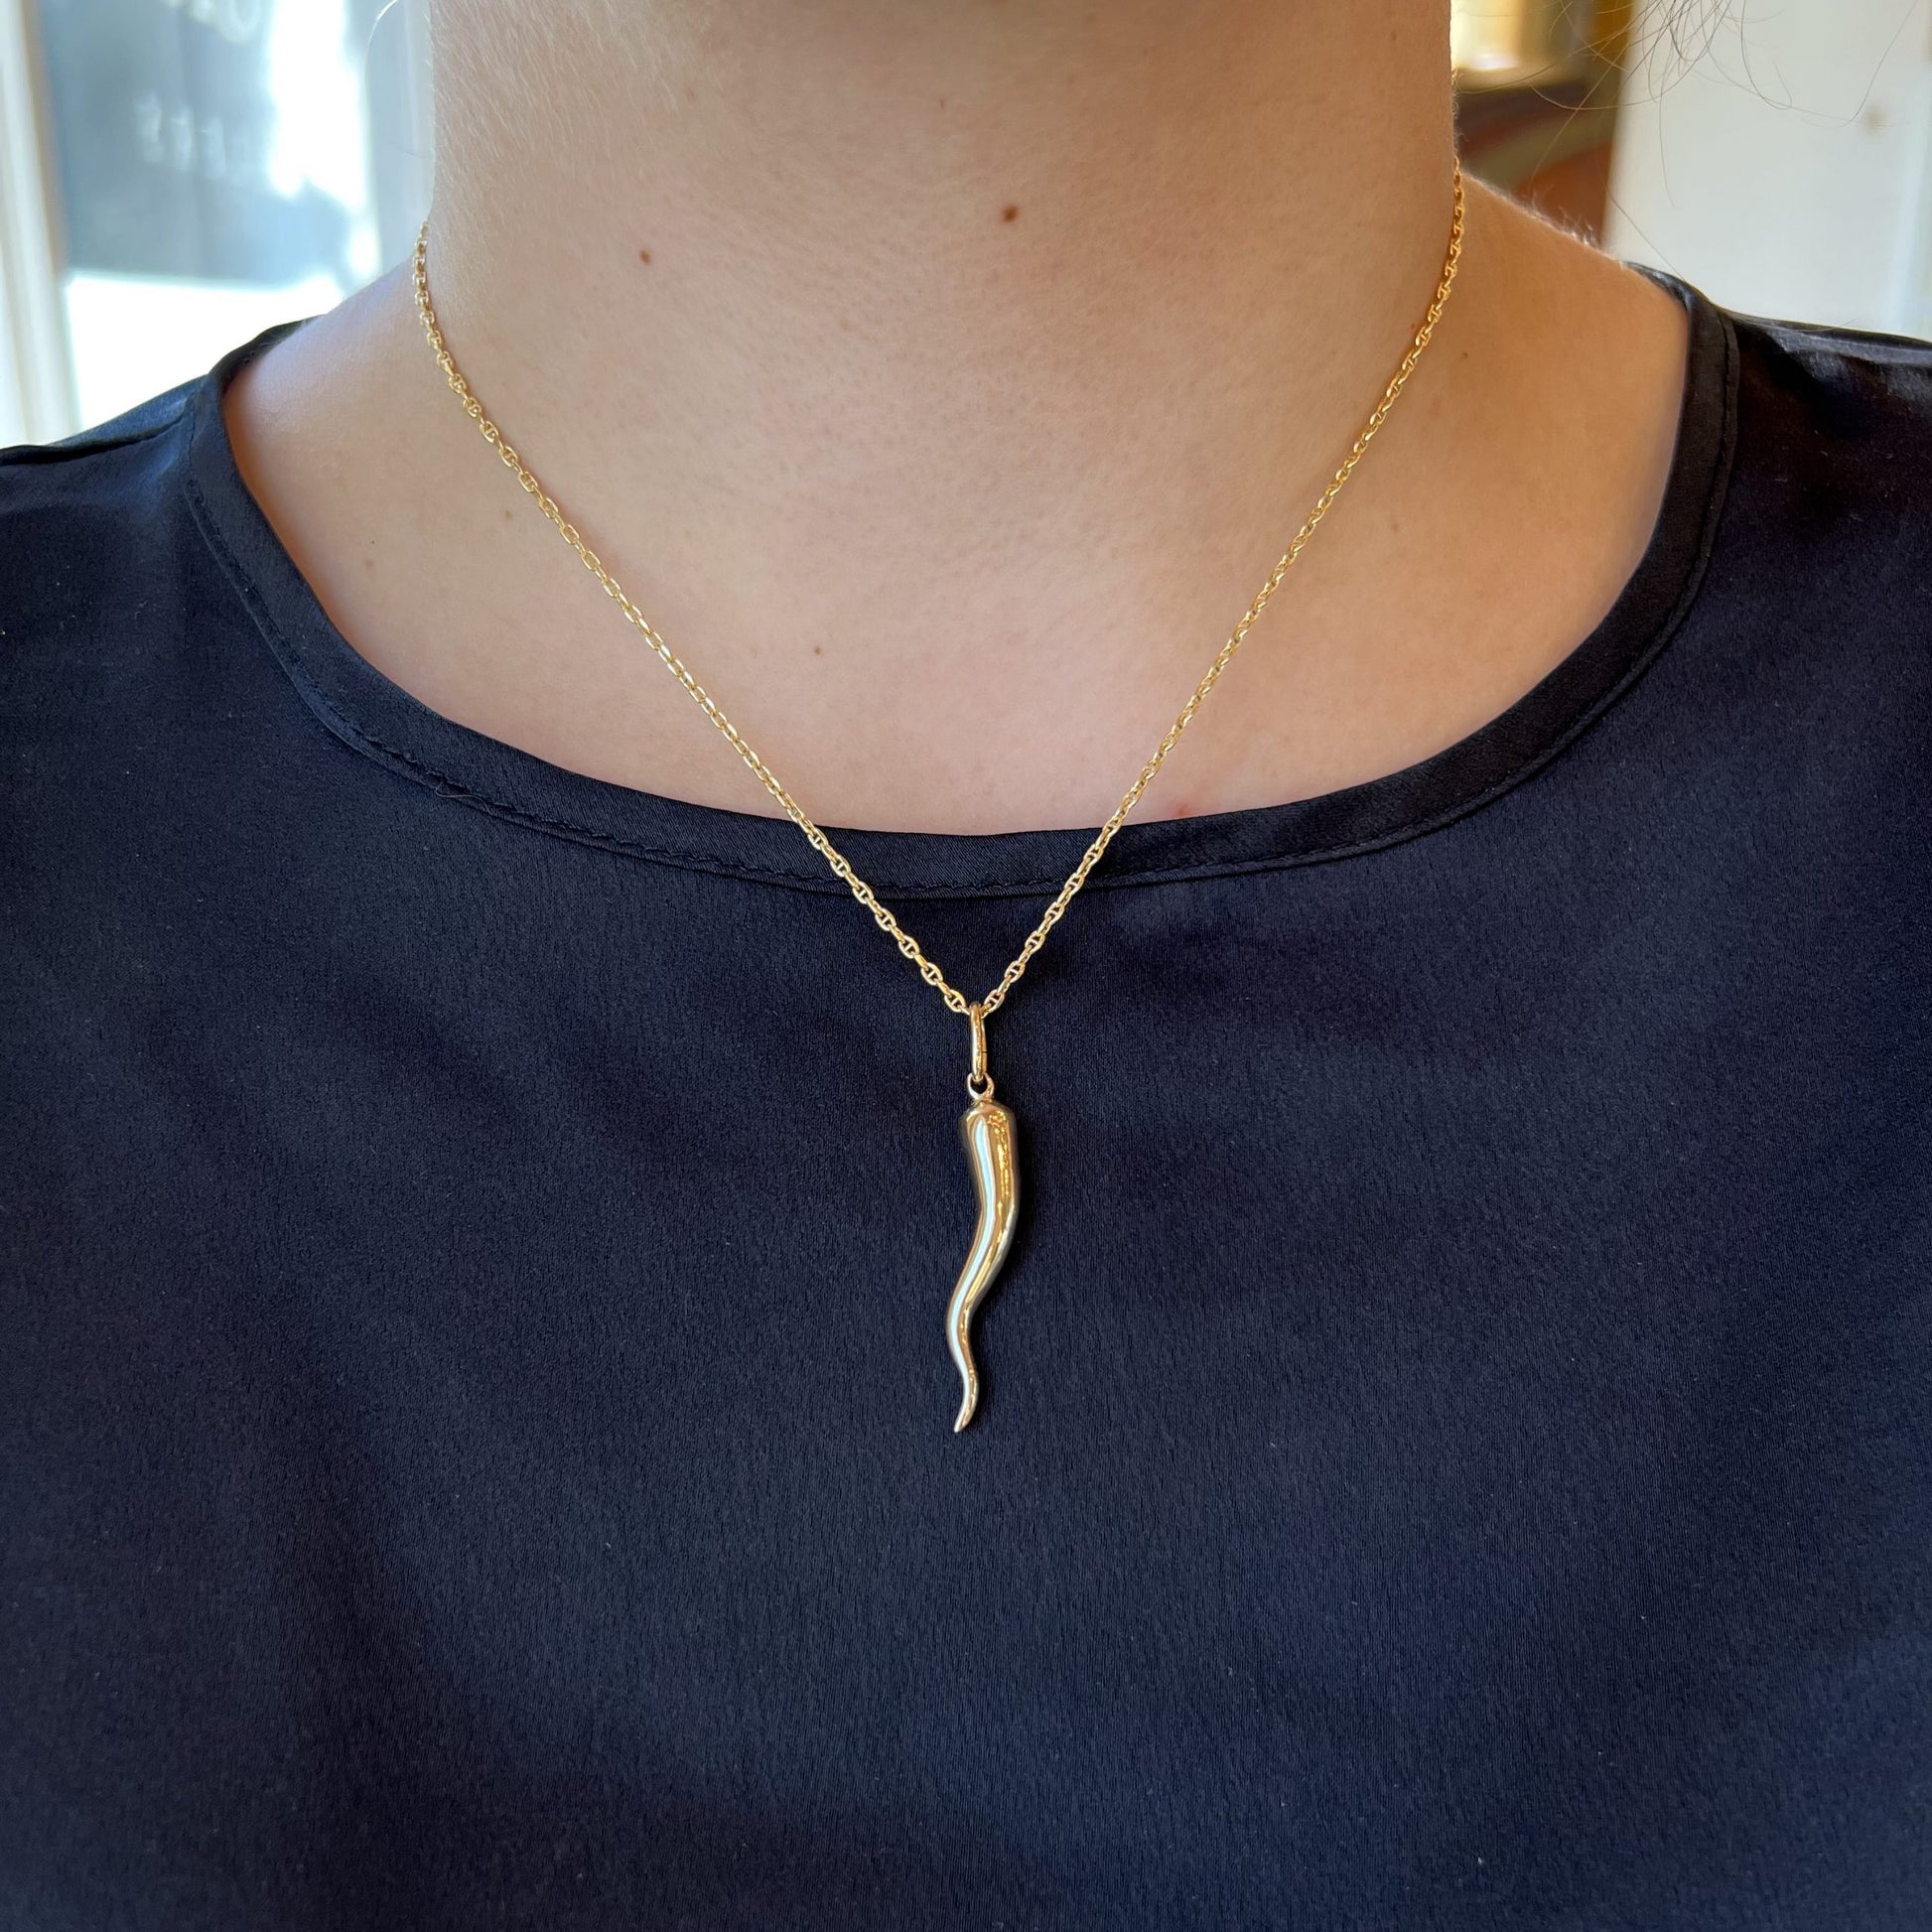 Good Luck Cornicello Pendant Necklace in 14k Yellow GoldComposition: 14 Karat Yellow GoldTotal Gram Weight: 8.9 gInscription: 14k 